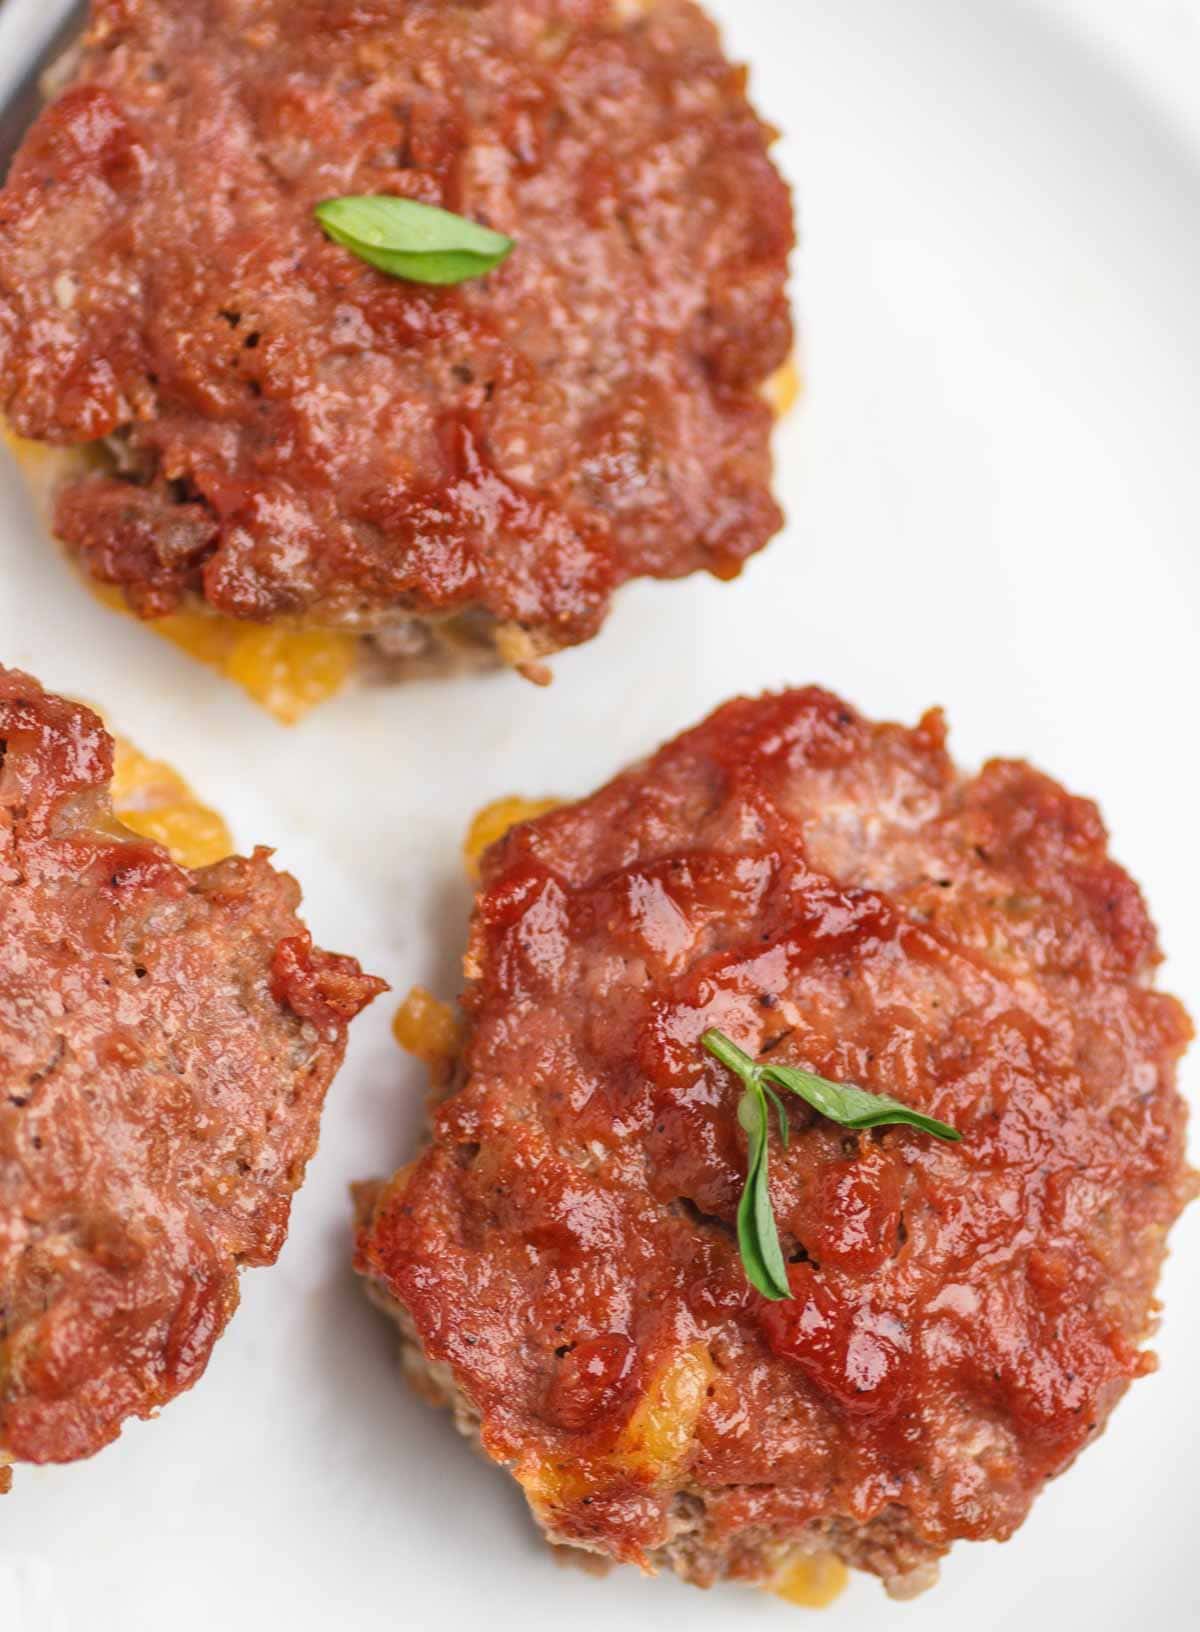 Cheese filled muffin pan meatloaf minis with tomato glaze.